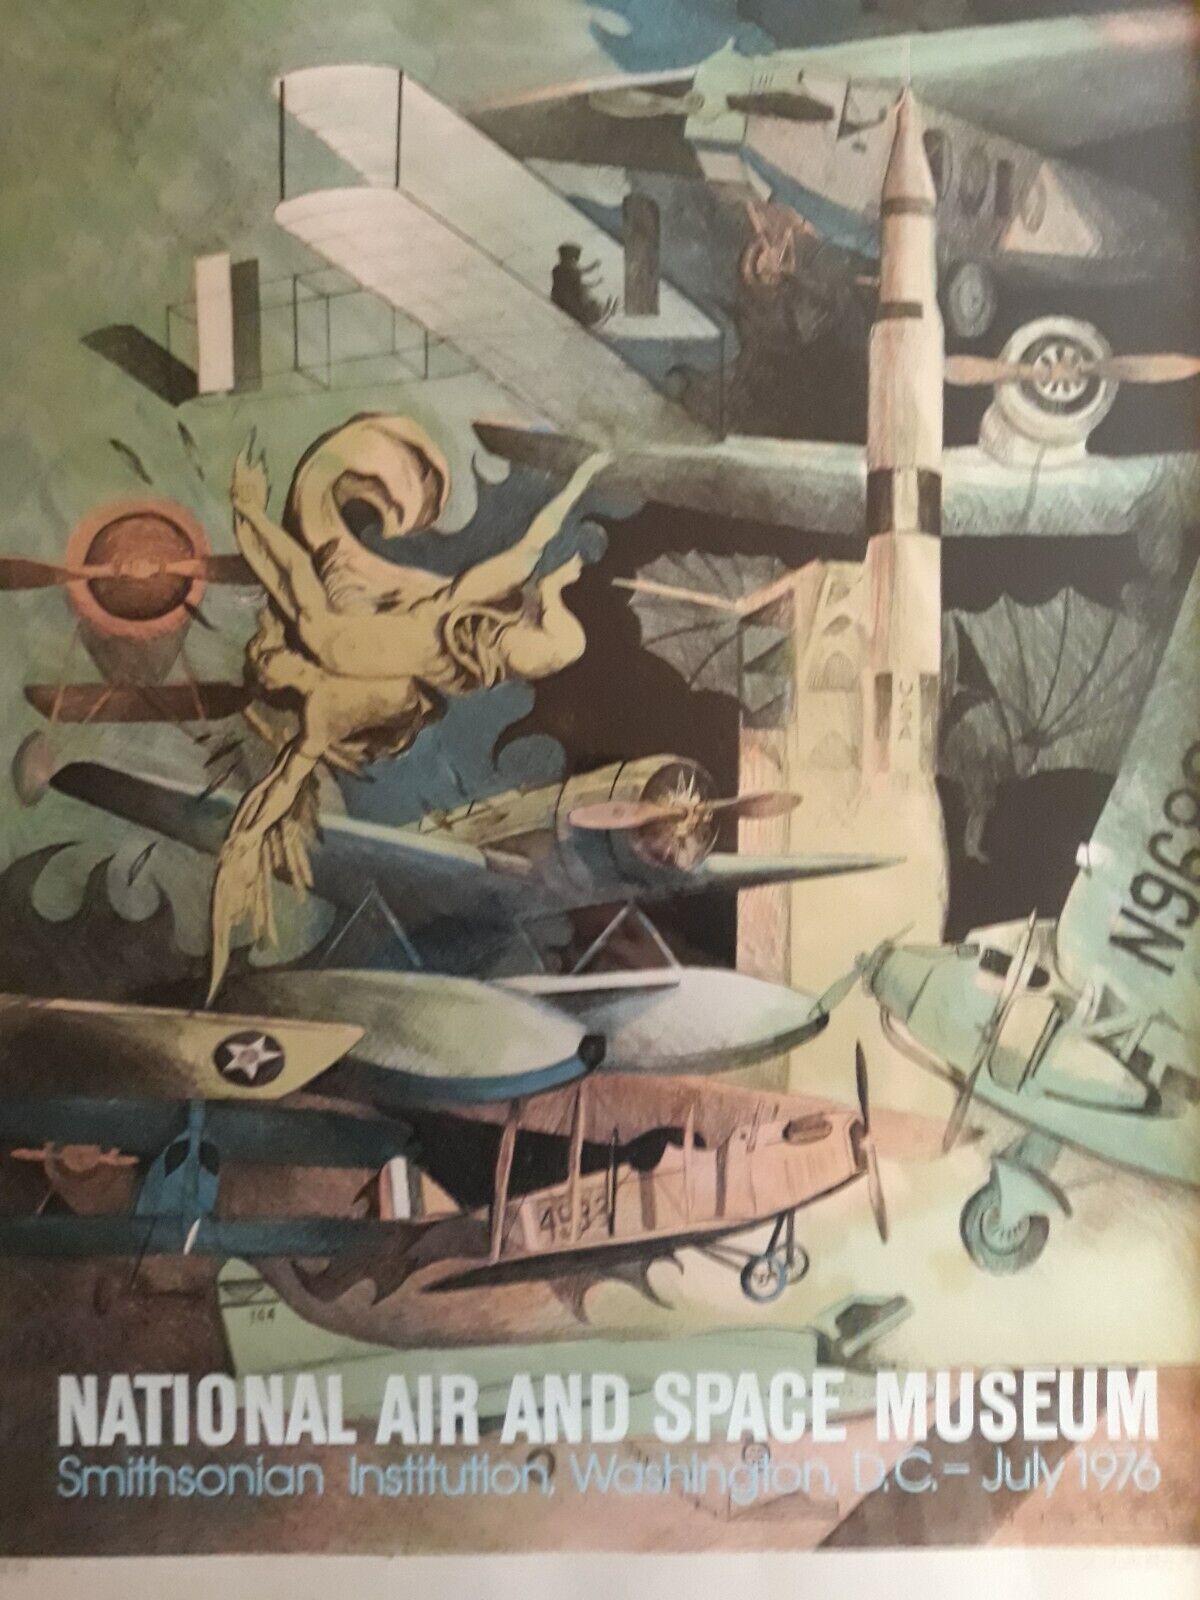 Rare Original National Air and Space Museum Poster, Signed & Numbered